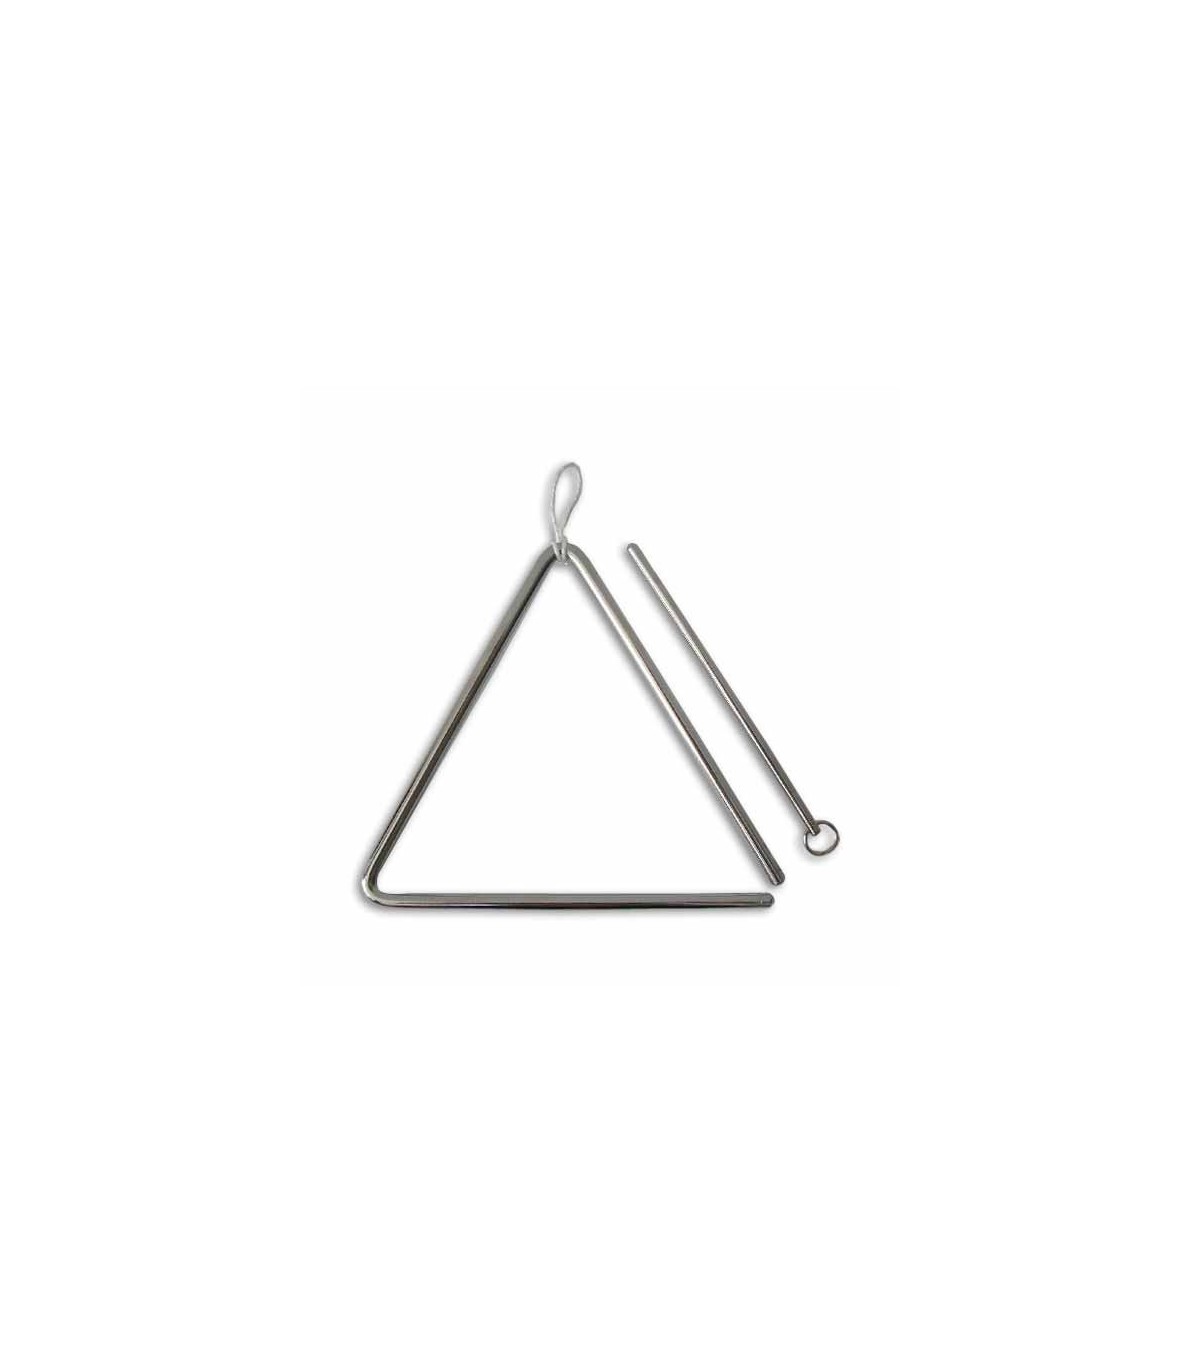 Musical Triangle Steel Percussion Instrument with Beater for